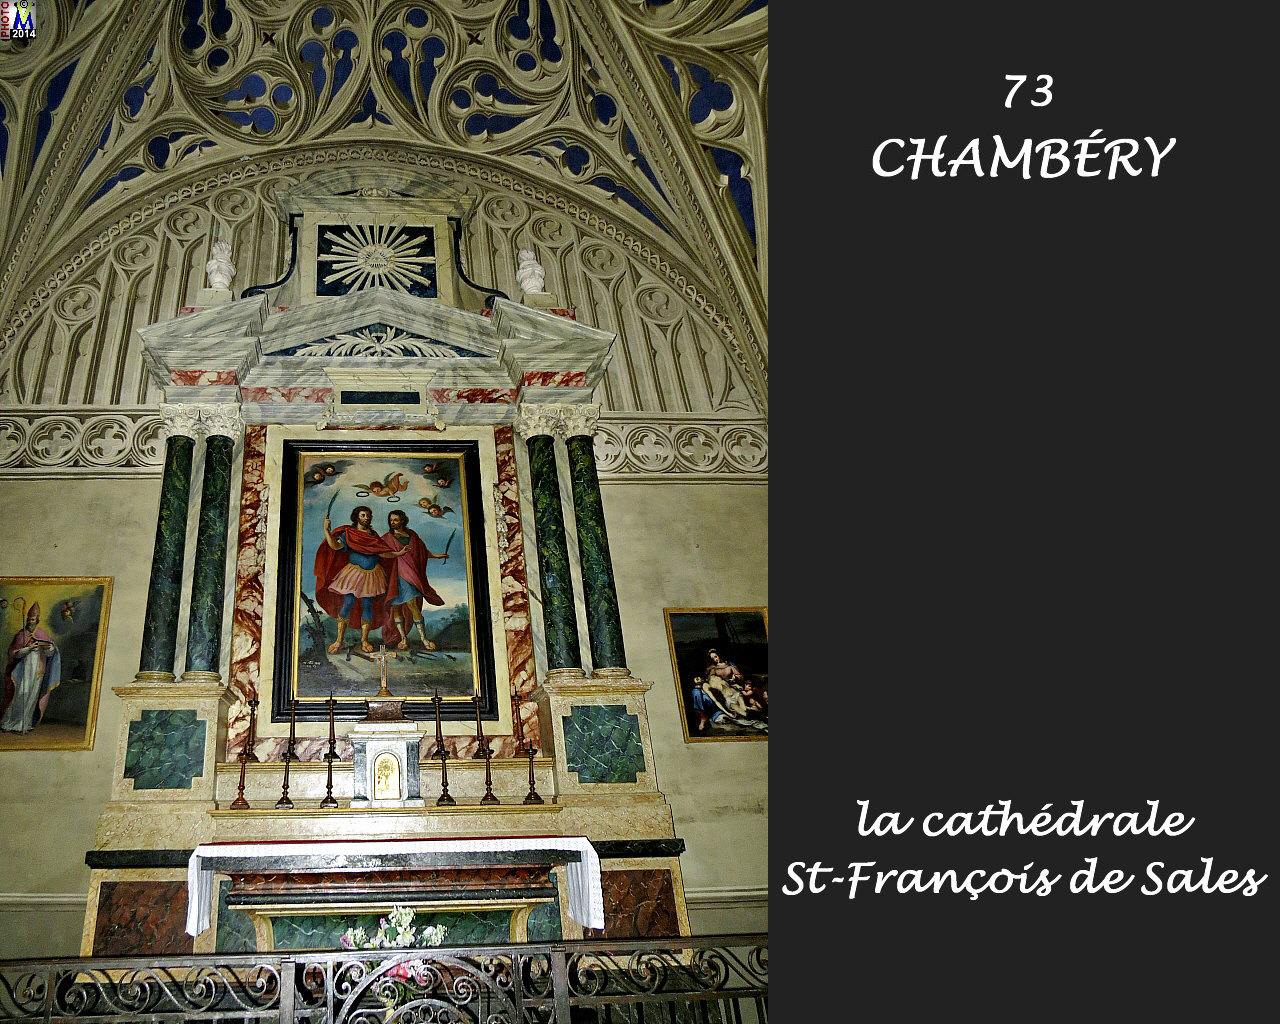 73CHAMBERY_cathedrale_206.jpg